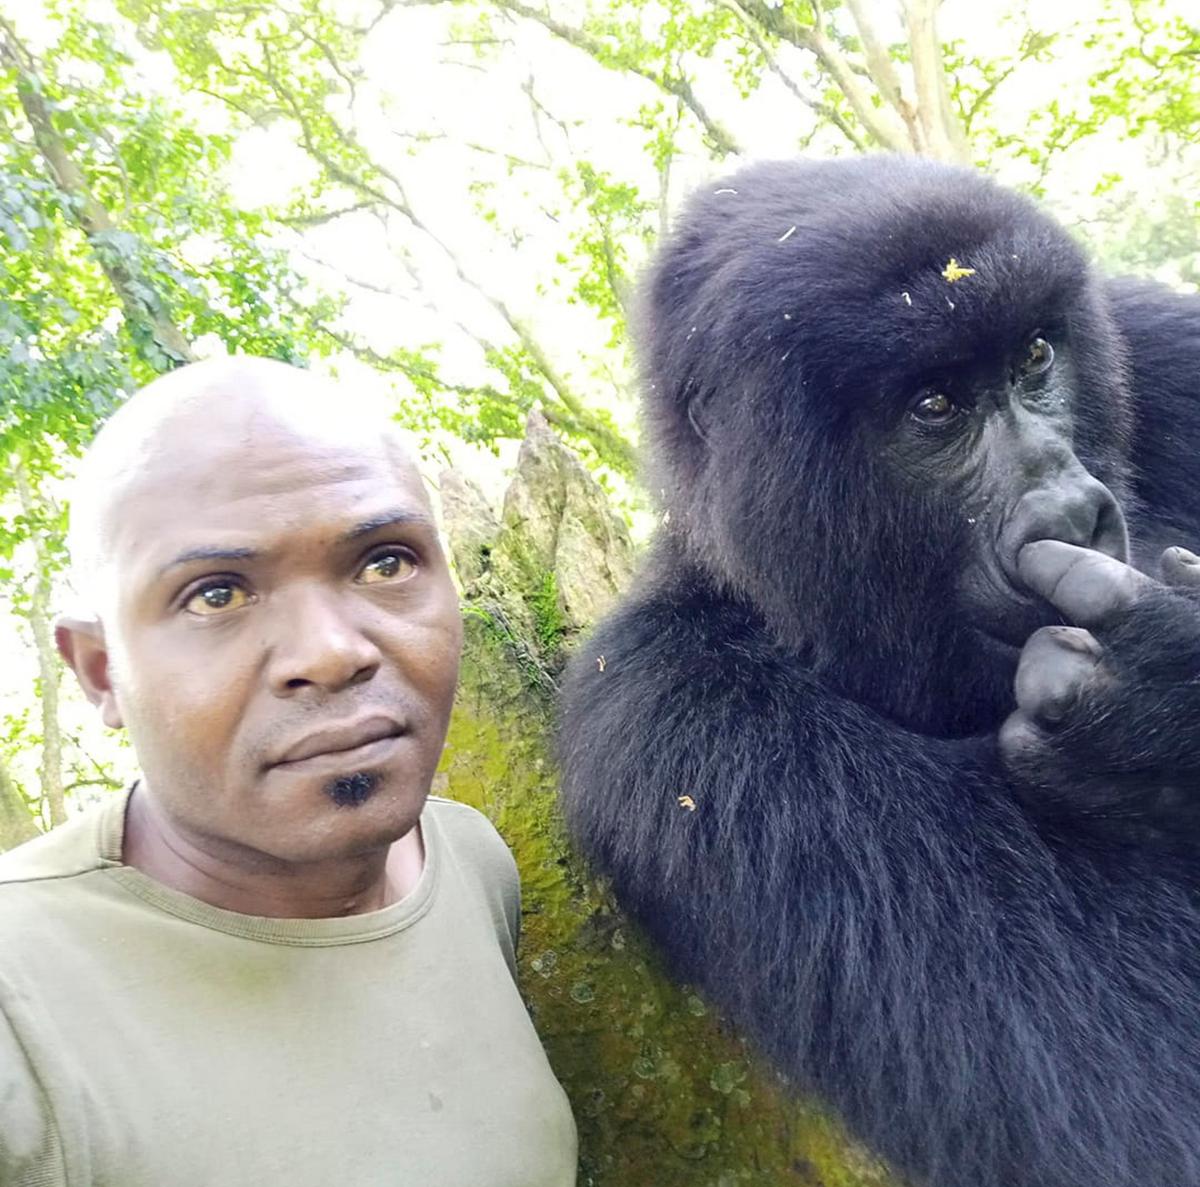 Warden Patrick Sadiki Karabaranga with a gorilla friend that's keeping its fingers busy fidgeting with its nose. (Caters News)